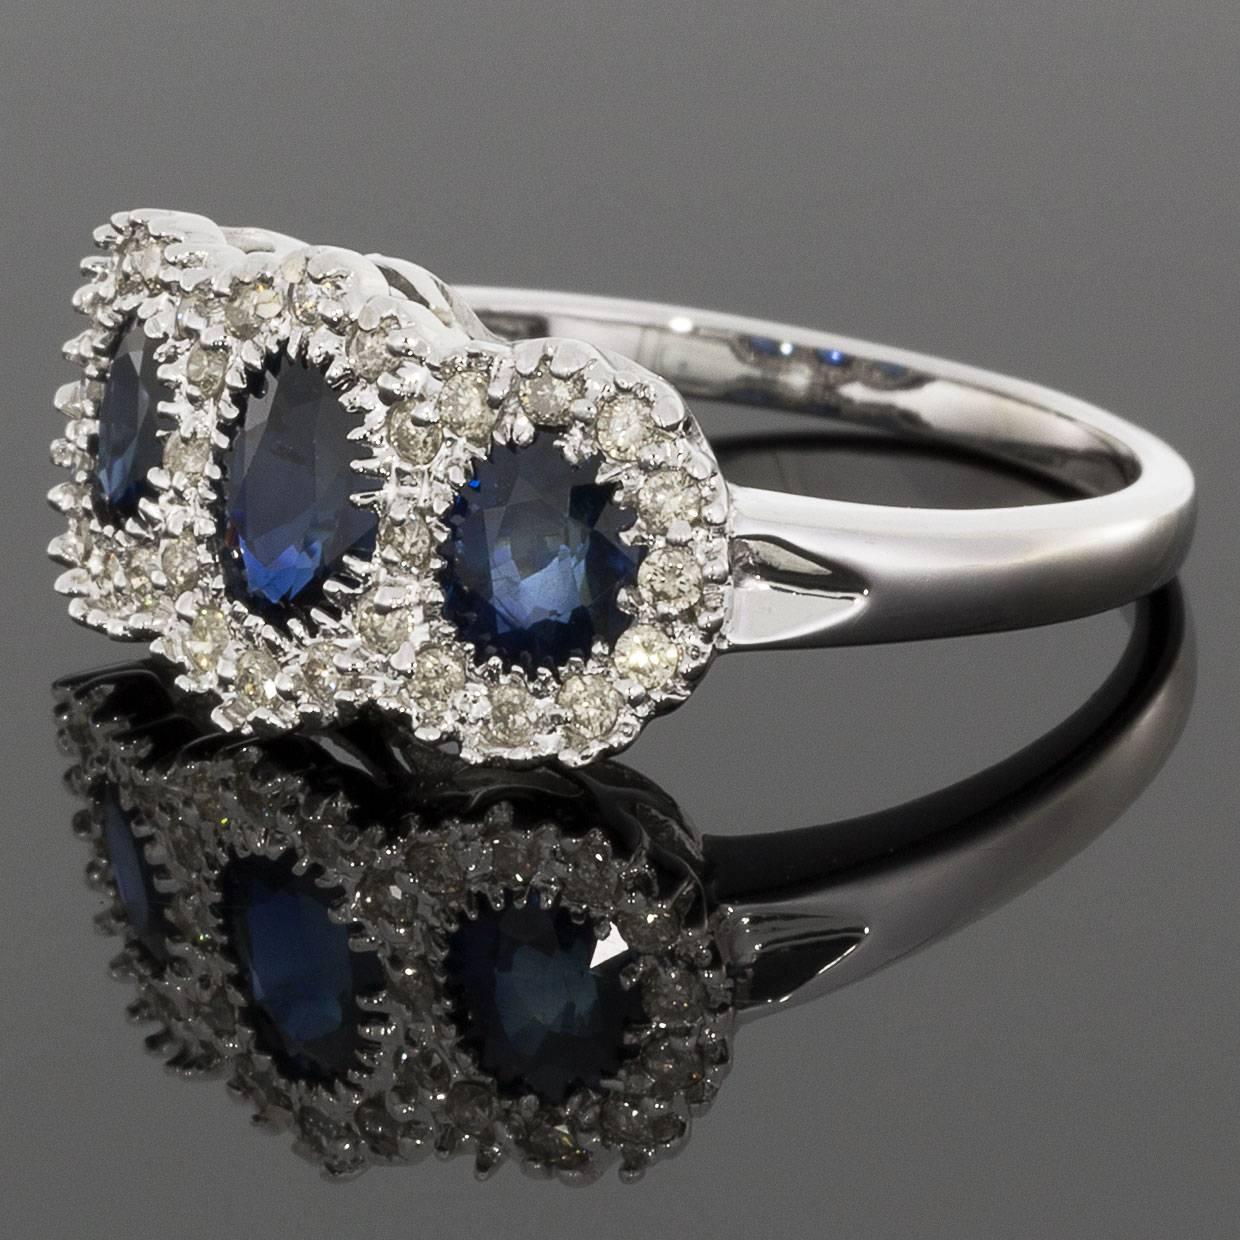 This elegant ring features 3 beautiful, natural, oval cut, blue sapphire center stones. These luscious sapphires are multi prong set in a 14 karat white gold ring, & they are surrounded by a halos of round brilliant diamonds. Captivating with